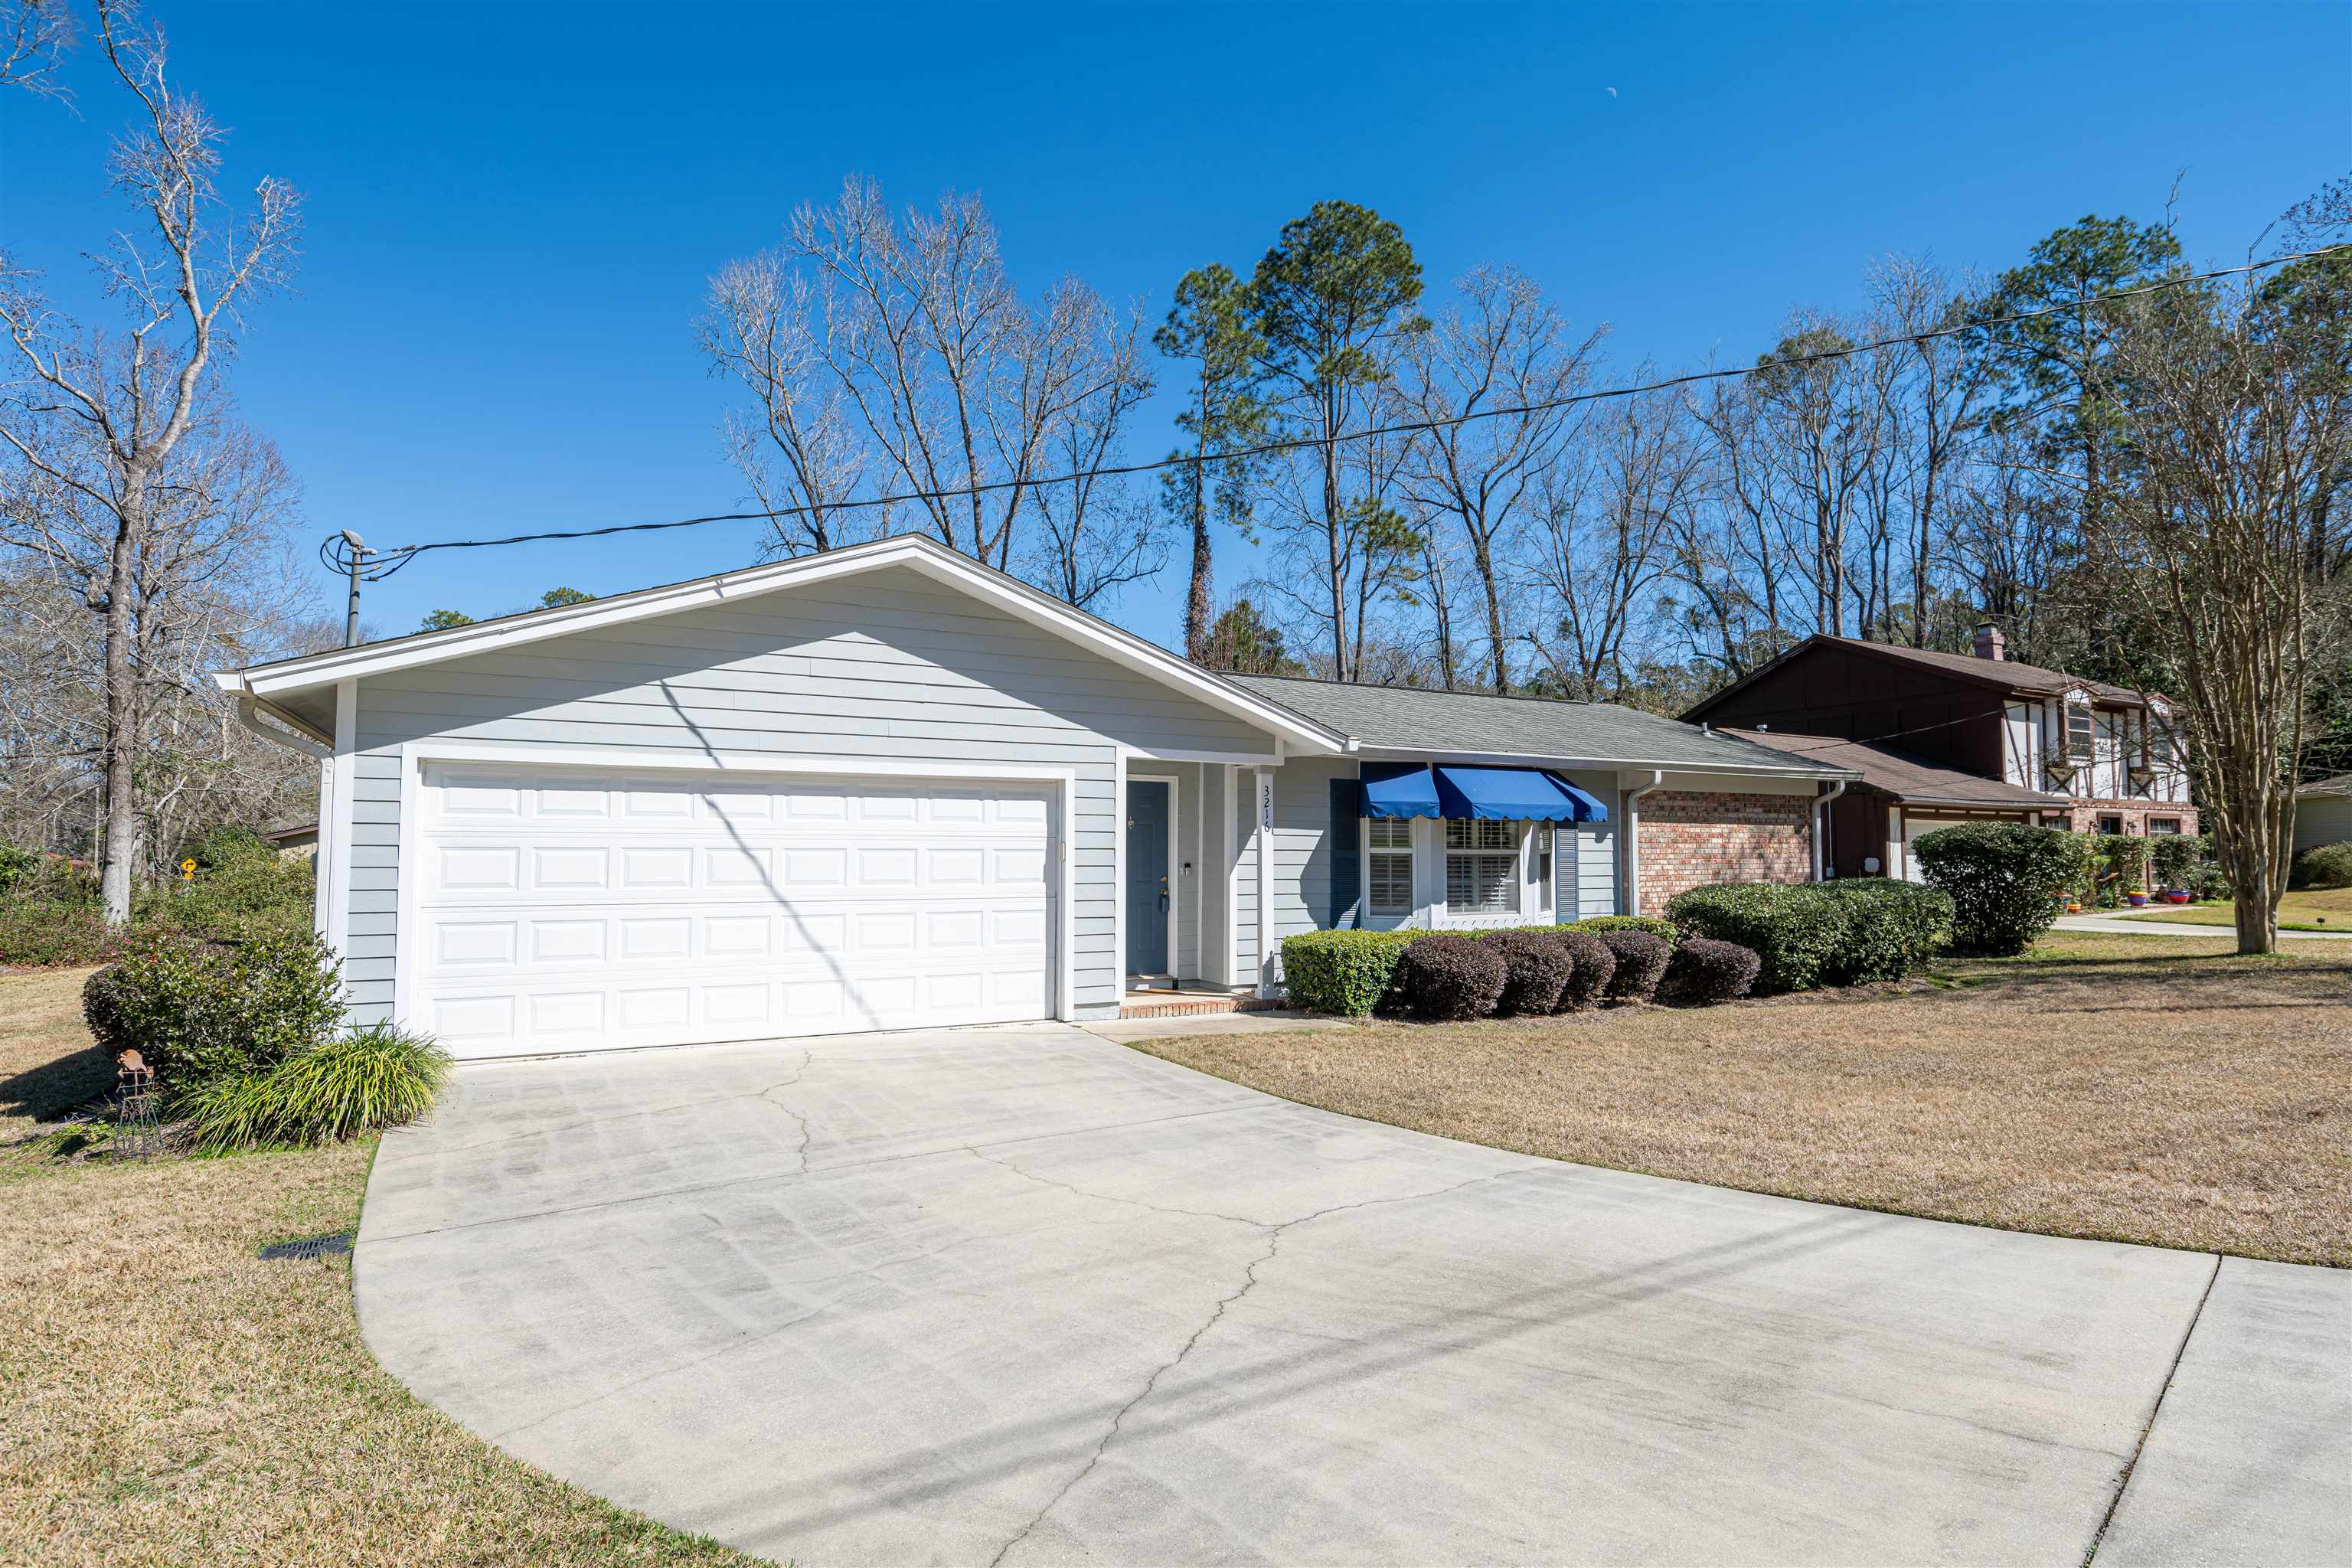 3216 CORAL SEA Court, TALLAHASSEE, FL 